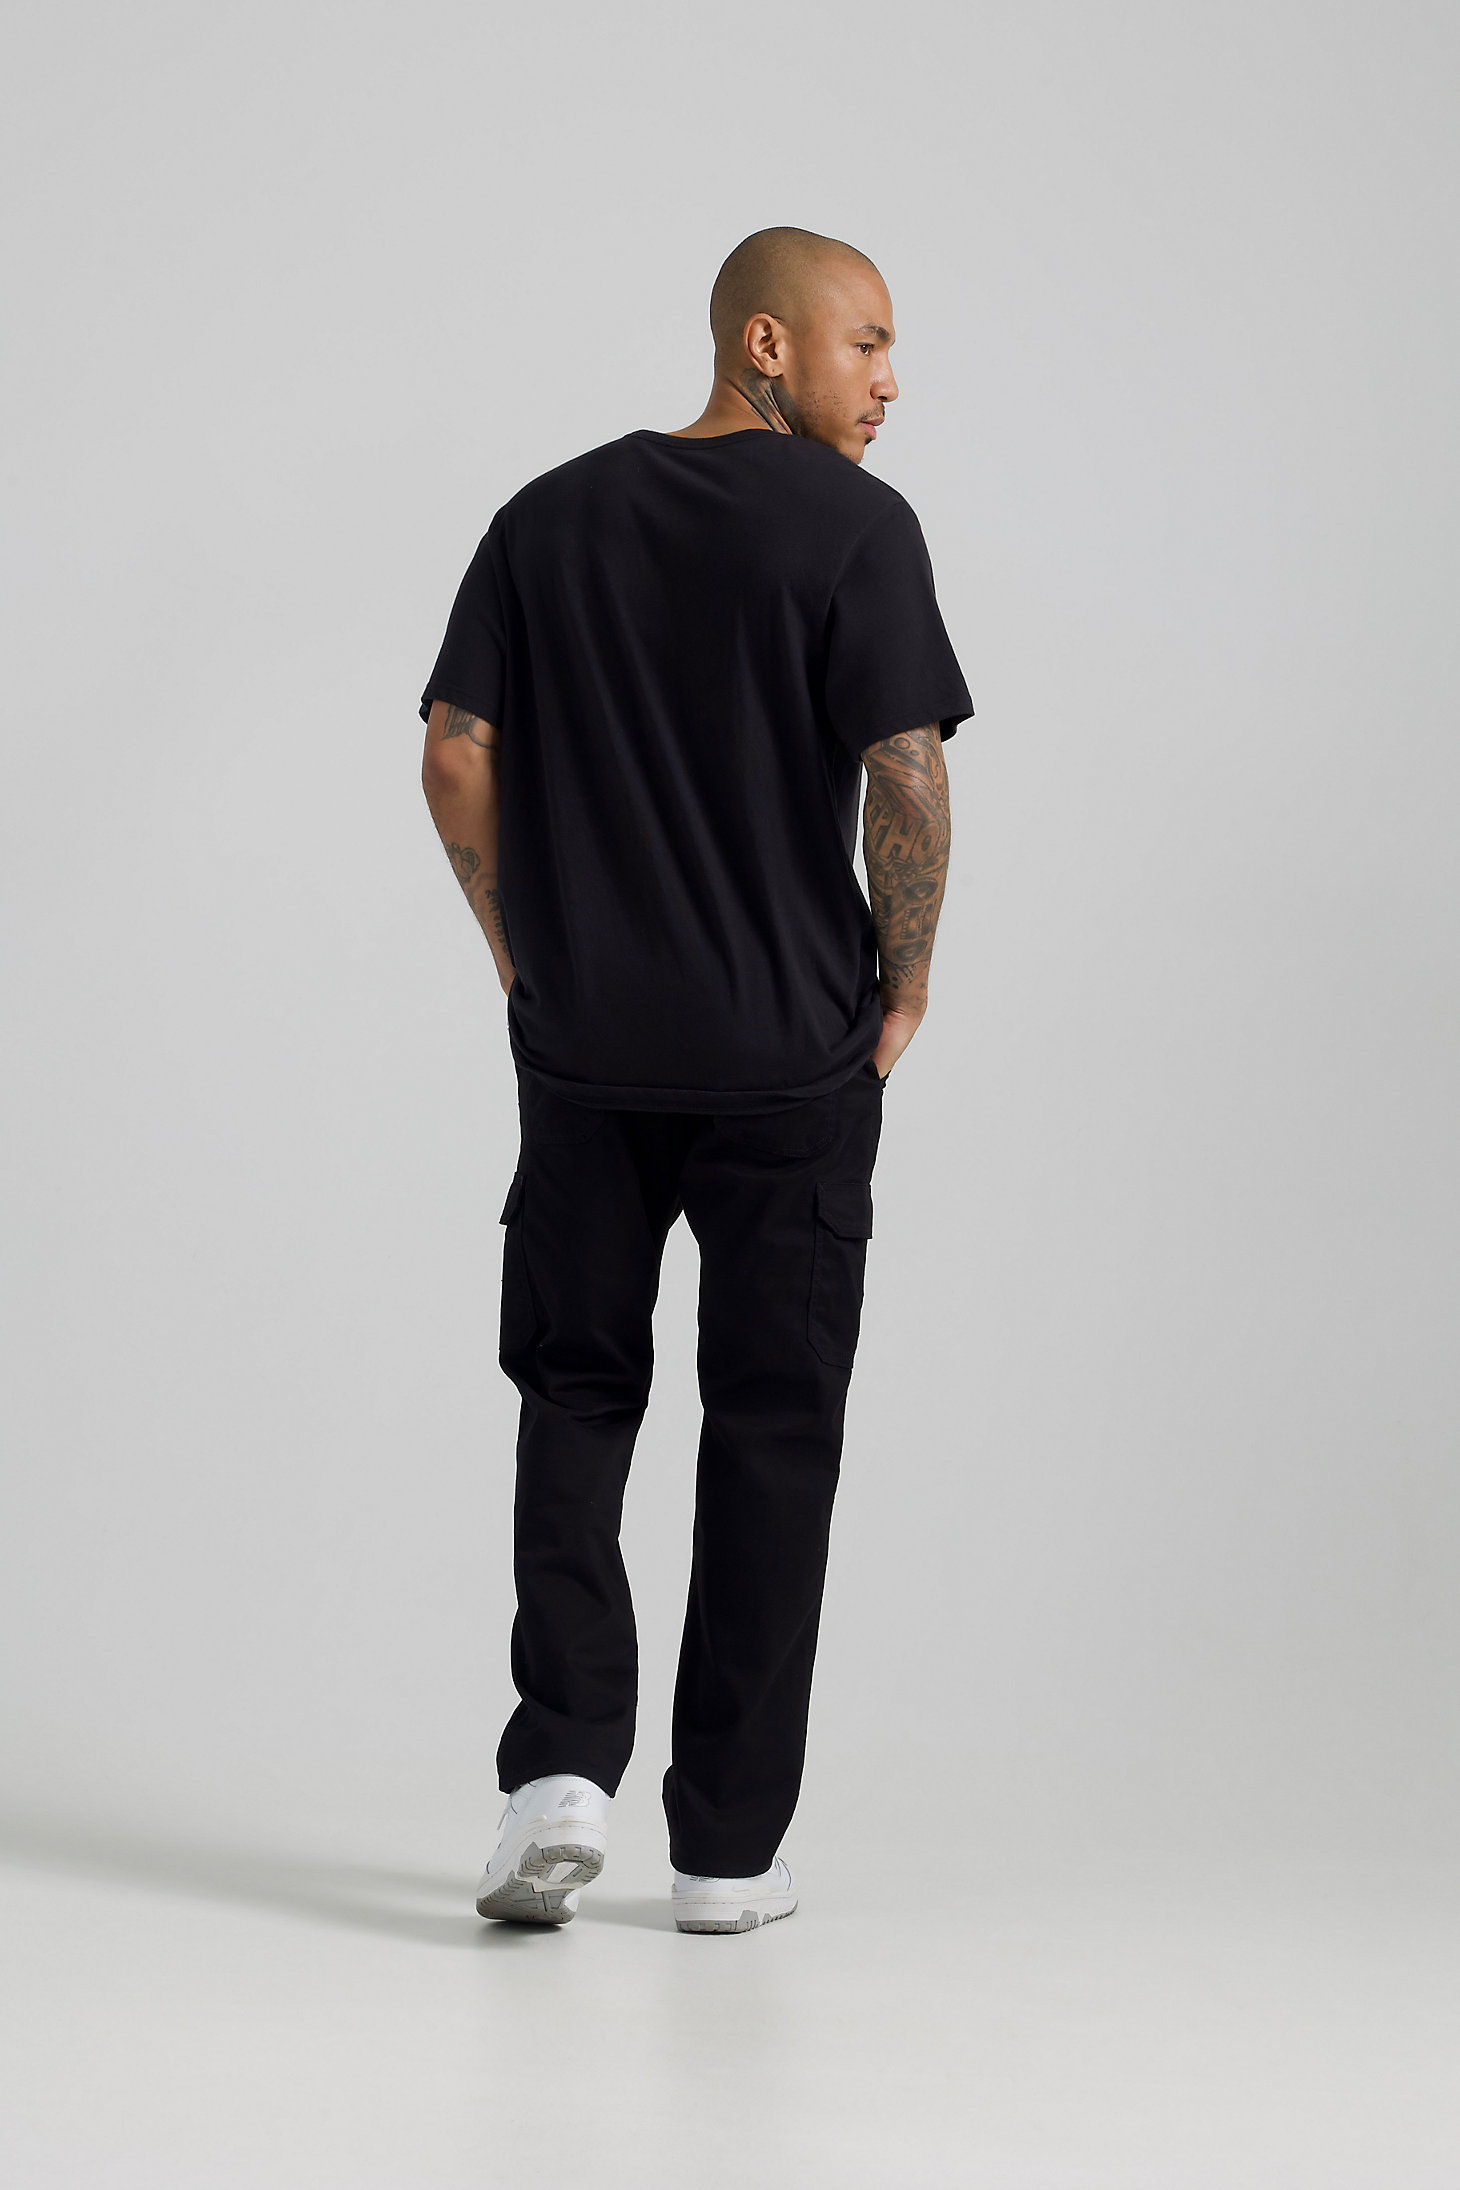 Men's Lee x BE@RBRICK  Buddy Lee Line Up Relaxed Fit Tee in Washed Black alternative view 3